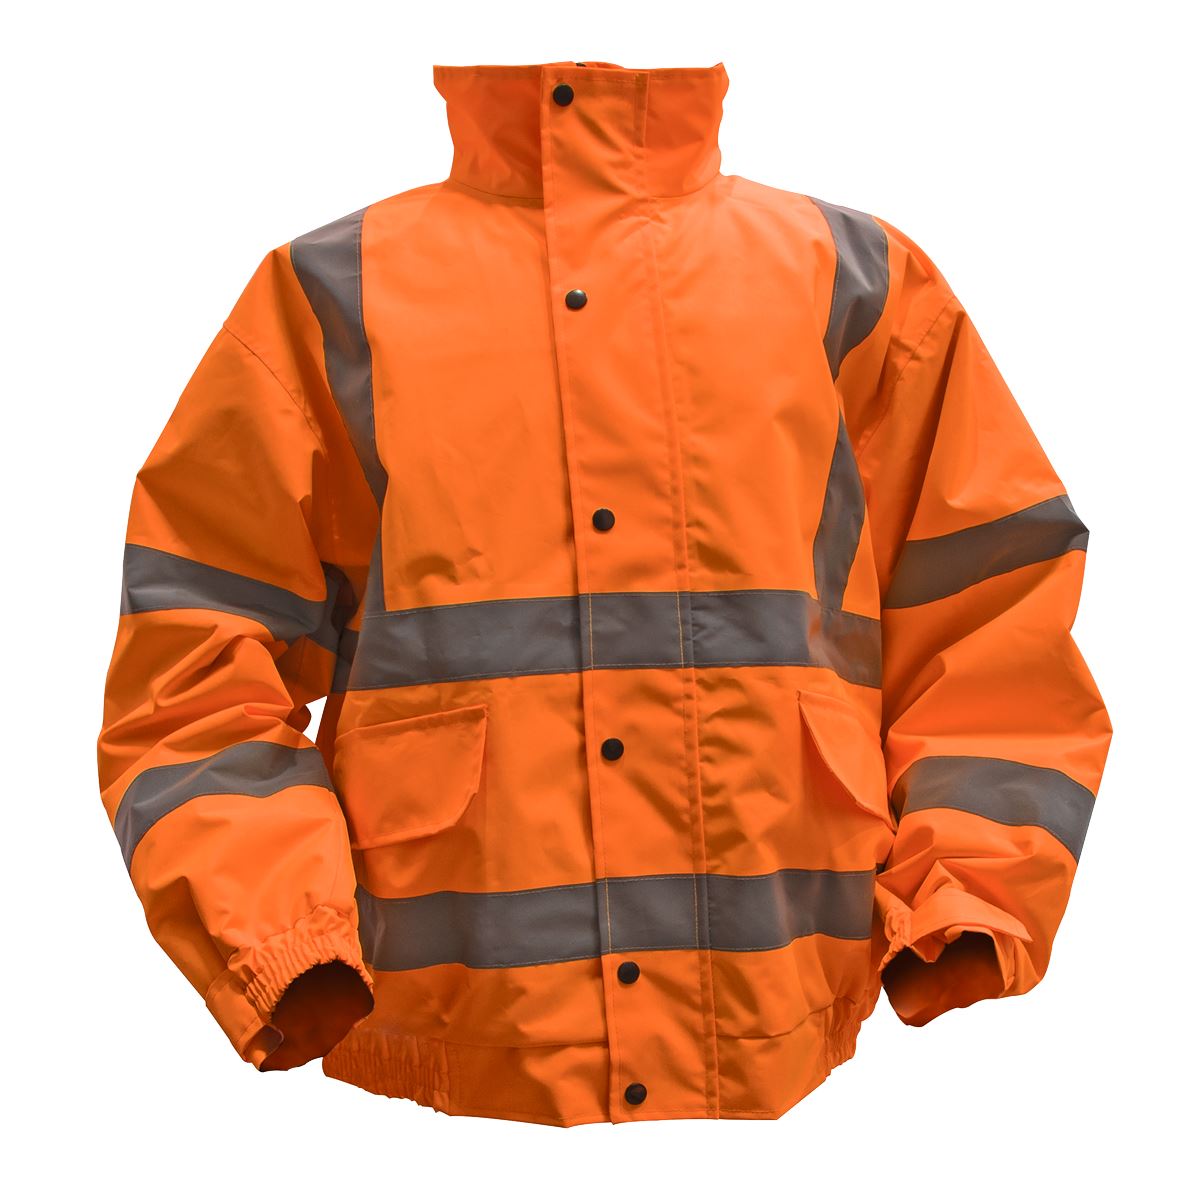 Worksafe by Sealey Hi-Vis Orange Jacket with Quilted Lining & Elasticated Waist - X-Large